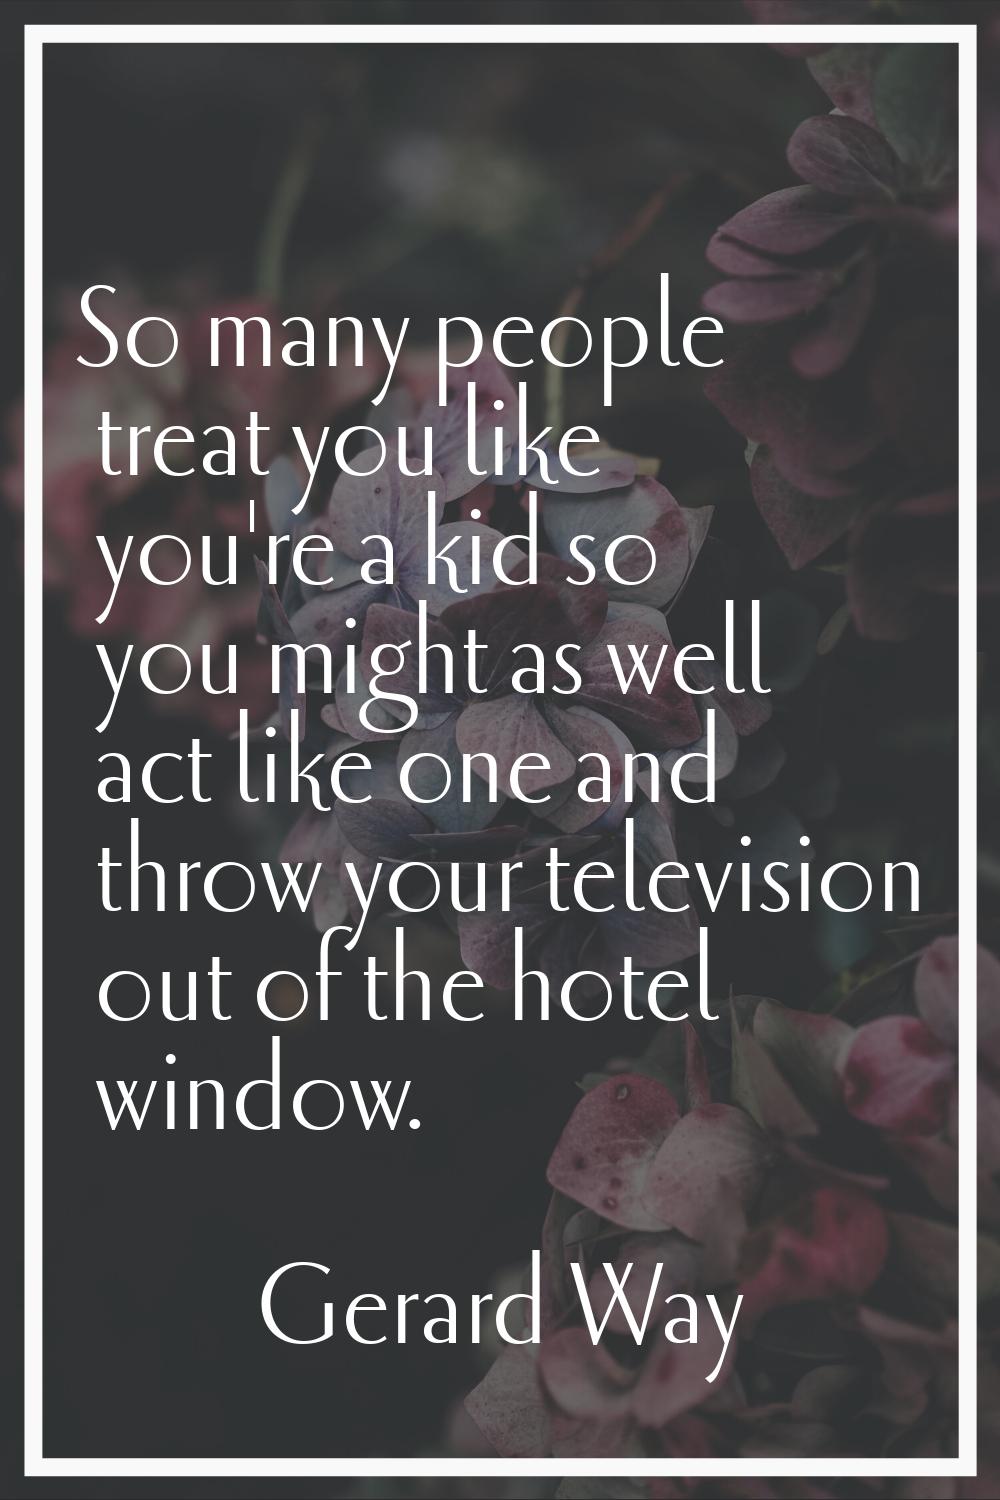 So many people treat you like you're a kid so you might as well act like one and throw your televis